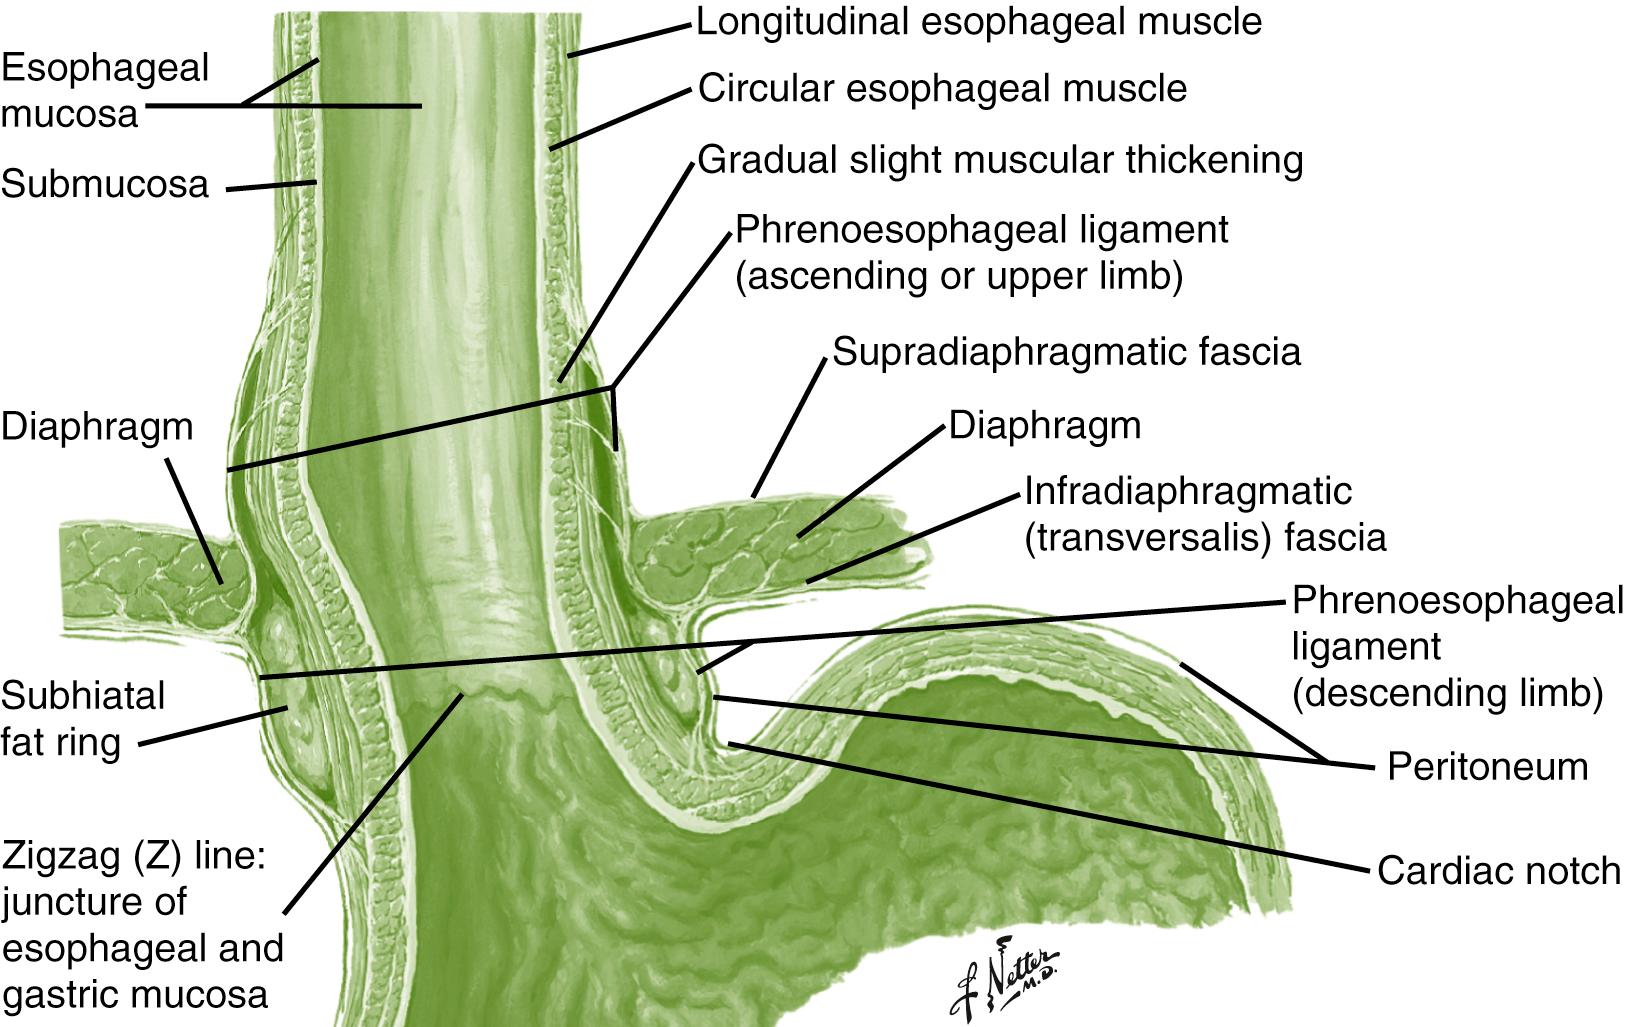 Fig. 19.3, The LES and the crural diaphragm constitute the intrinsic and extrinsic sphincter, respectively. The two sphincters are anatomically superimposed on each other and are anchored by the phrenoesophageal ligament.